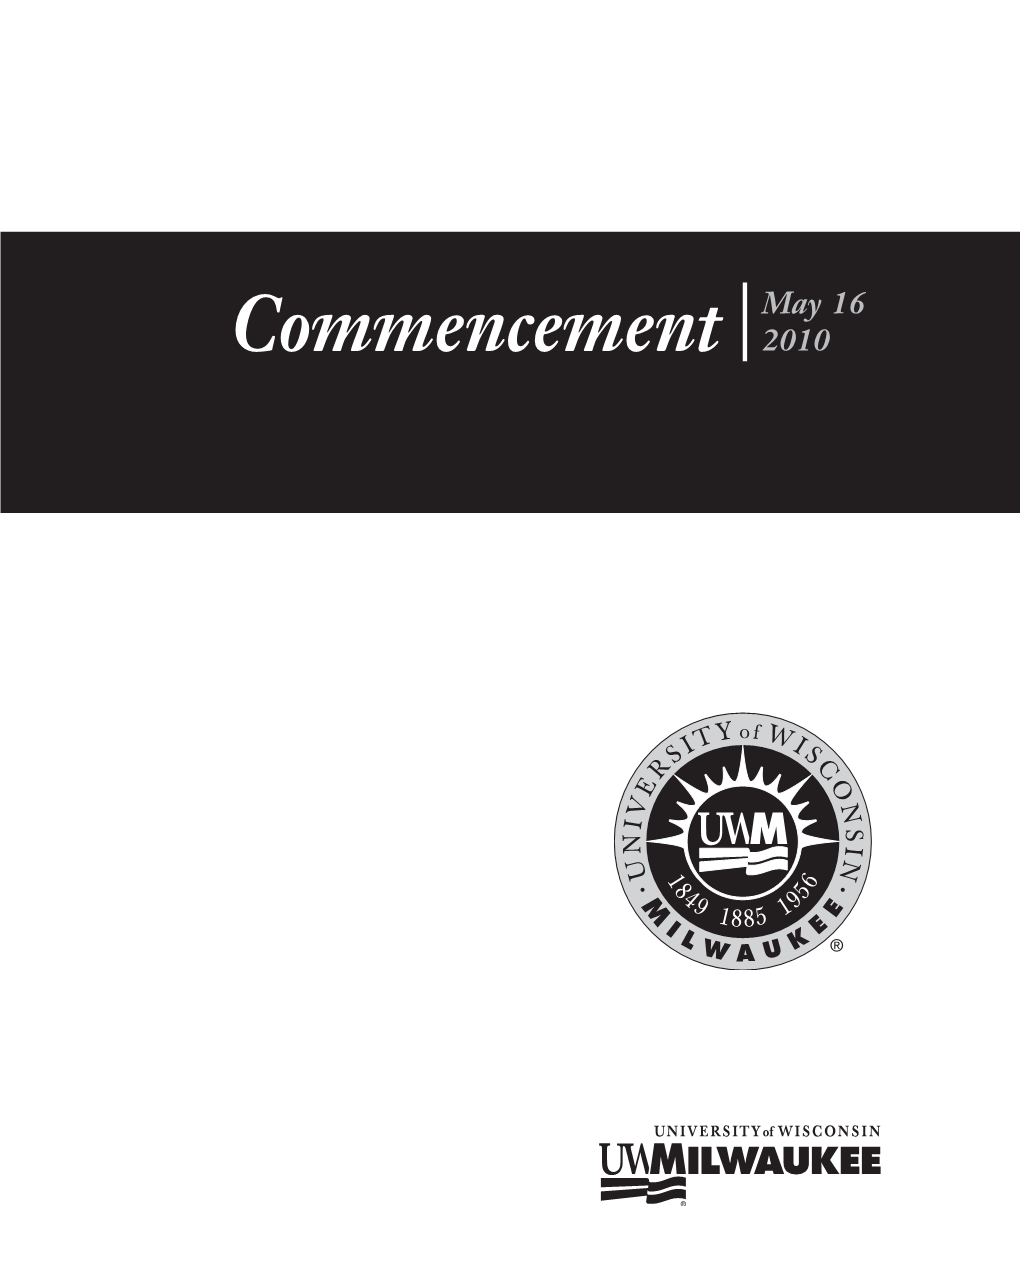 Commencement May 16, 2010